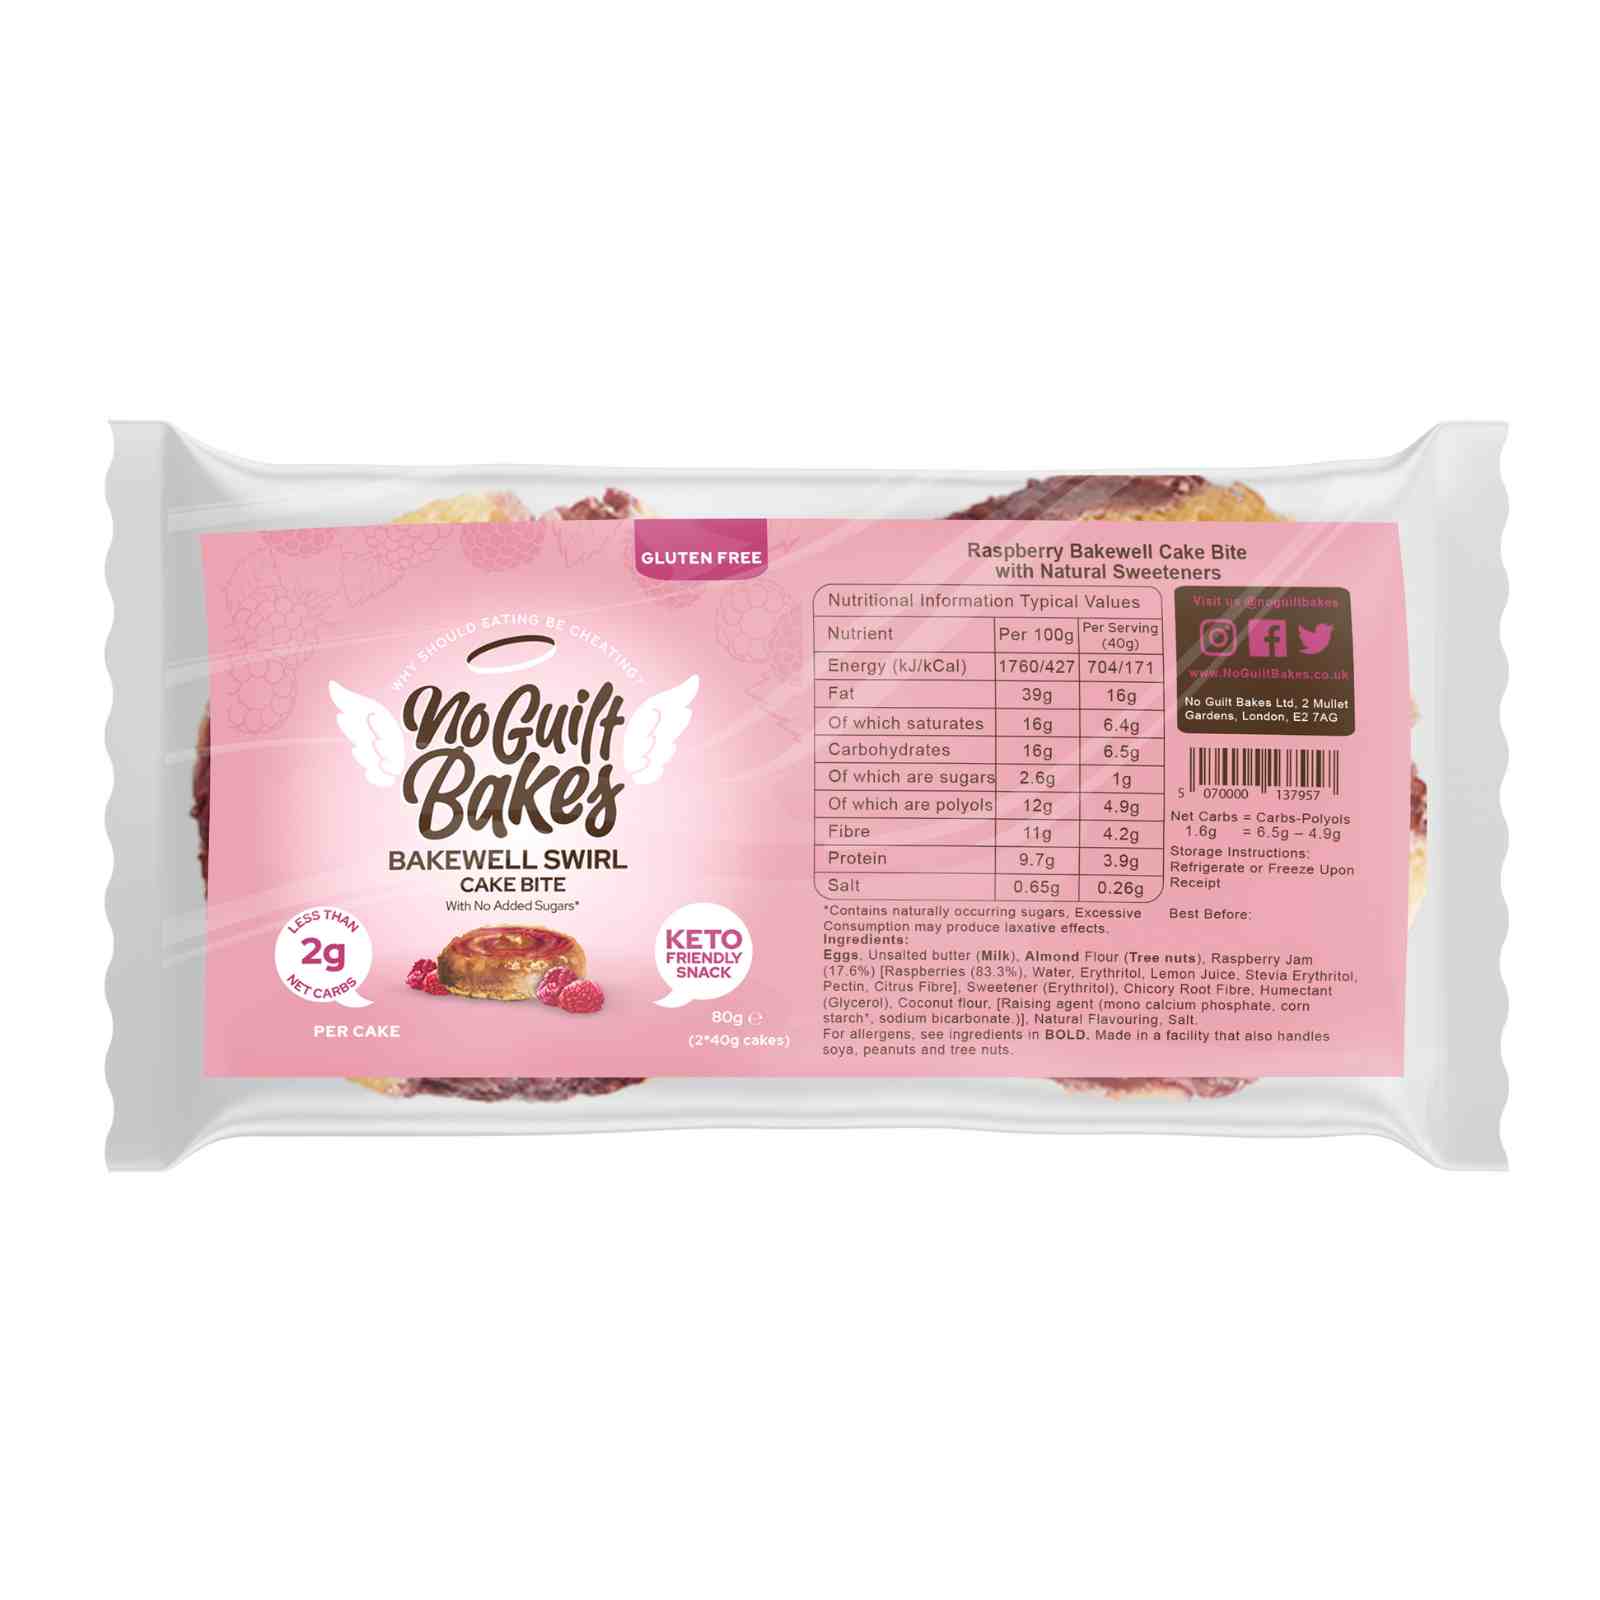 Indulge in No Guilt Bakes's package of healthy Raspberry Bakewell Swirl Keto Cake Bites, perfect for those on a ketogenic diet. The treats are set against a pink background for a delightful presentation.